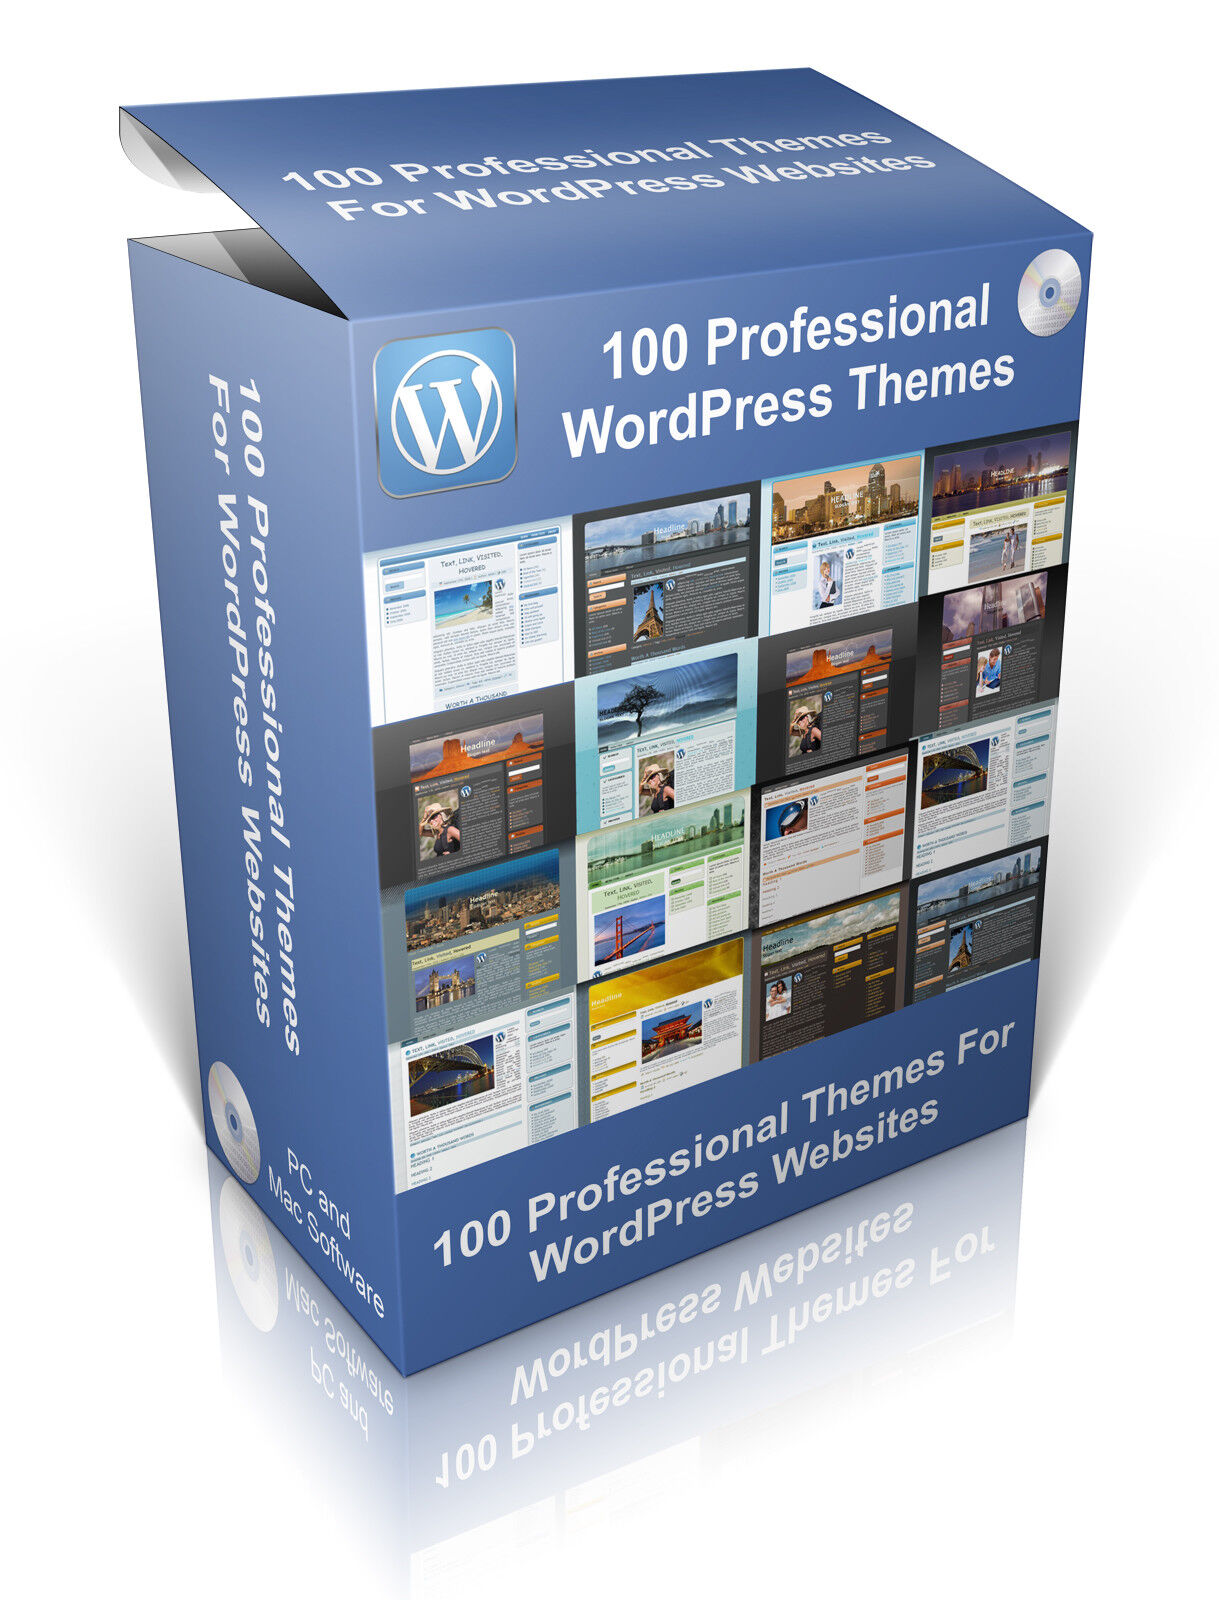 100 Professional Themes For WordPress Websites, Design Your Own websites.